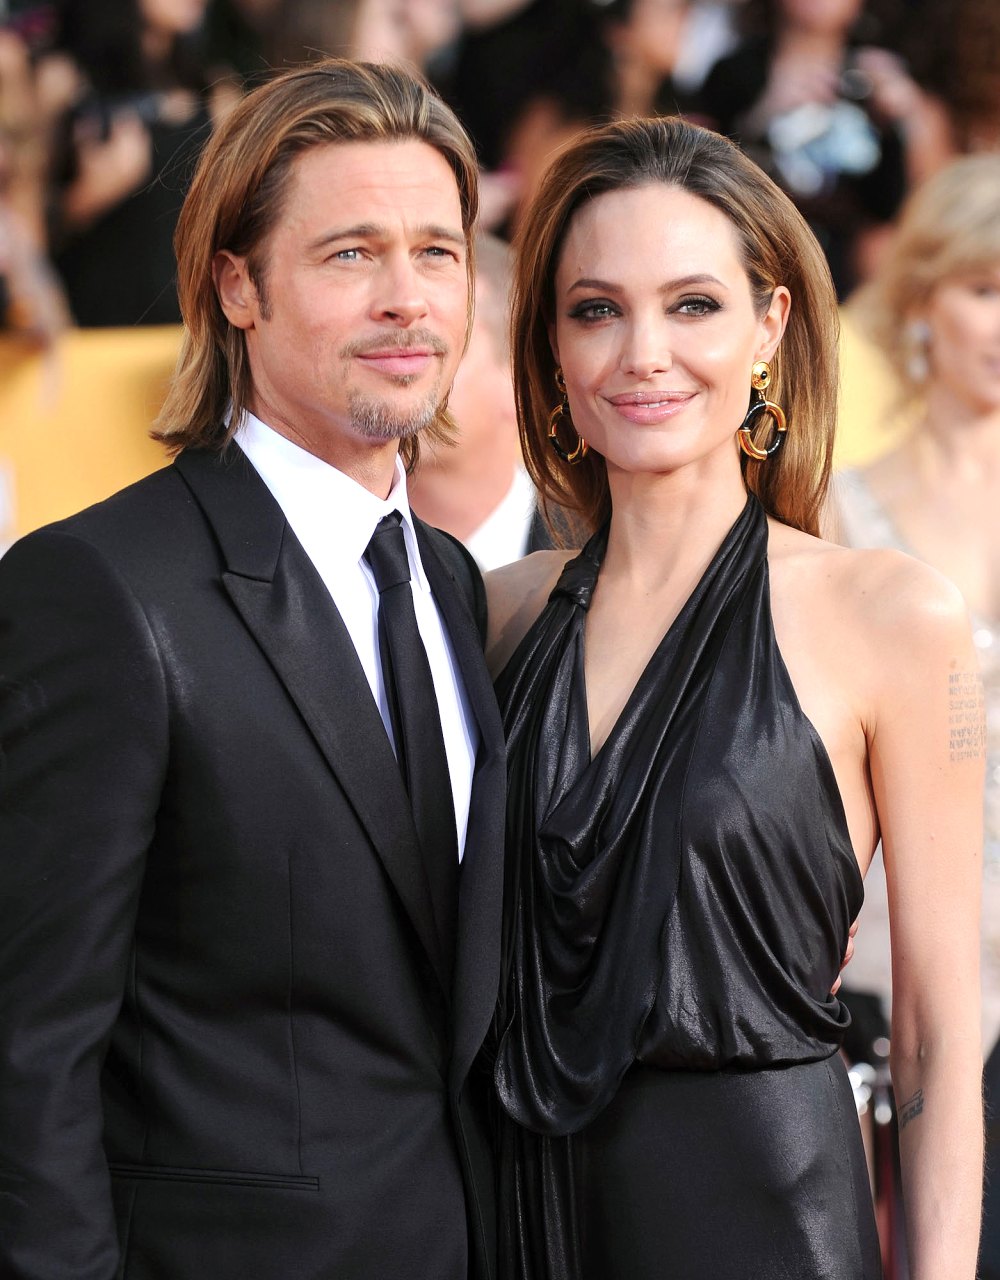 Brad Pitt and Angelina Jolie Are Preparing to Wrap Up Lengthy Divorce Soon